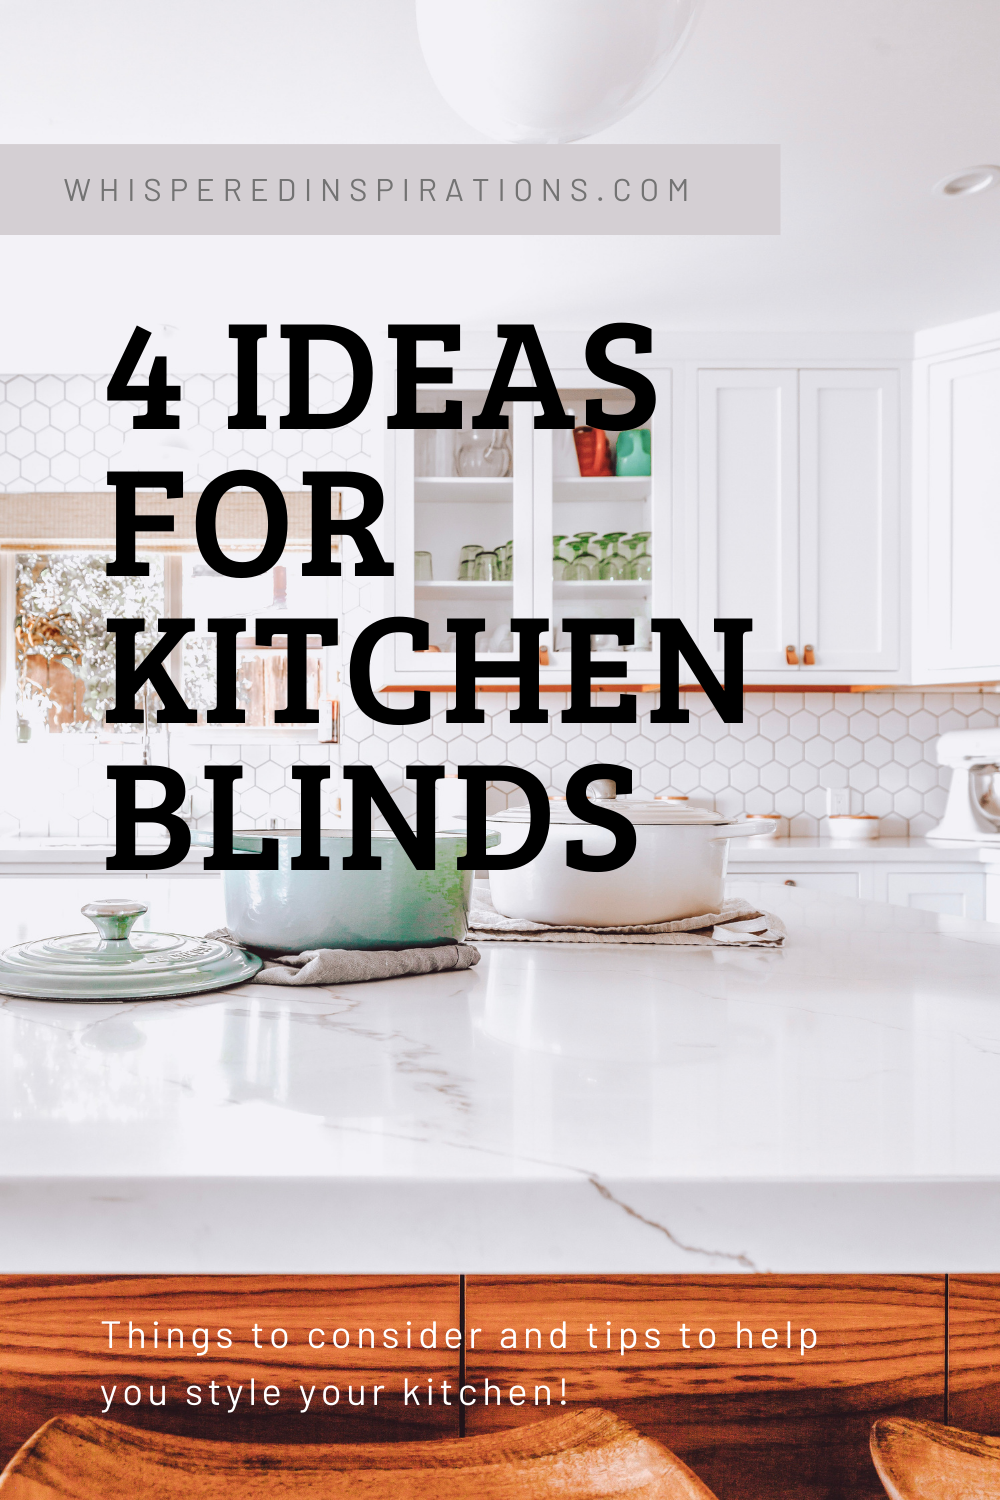 A white and bright kitchen shows a functional kitchen with blinds. This article gives 4 ideas for kitchen blinds.